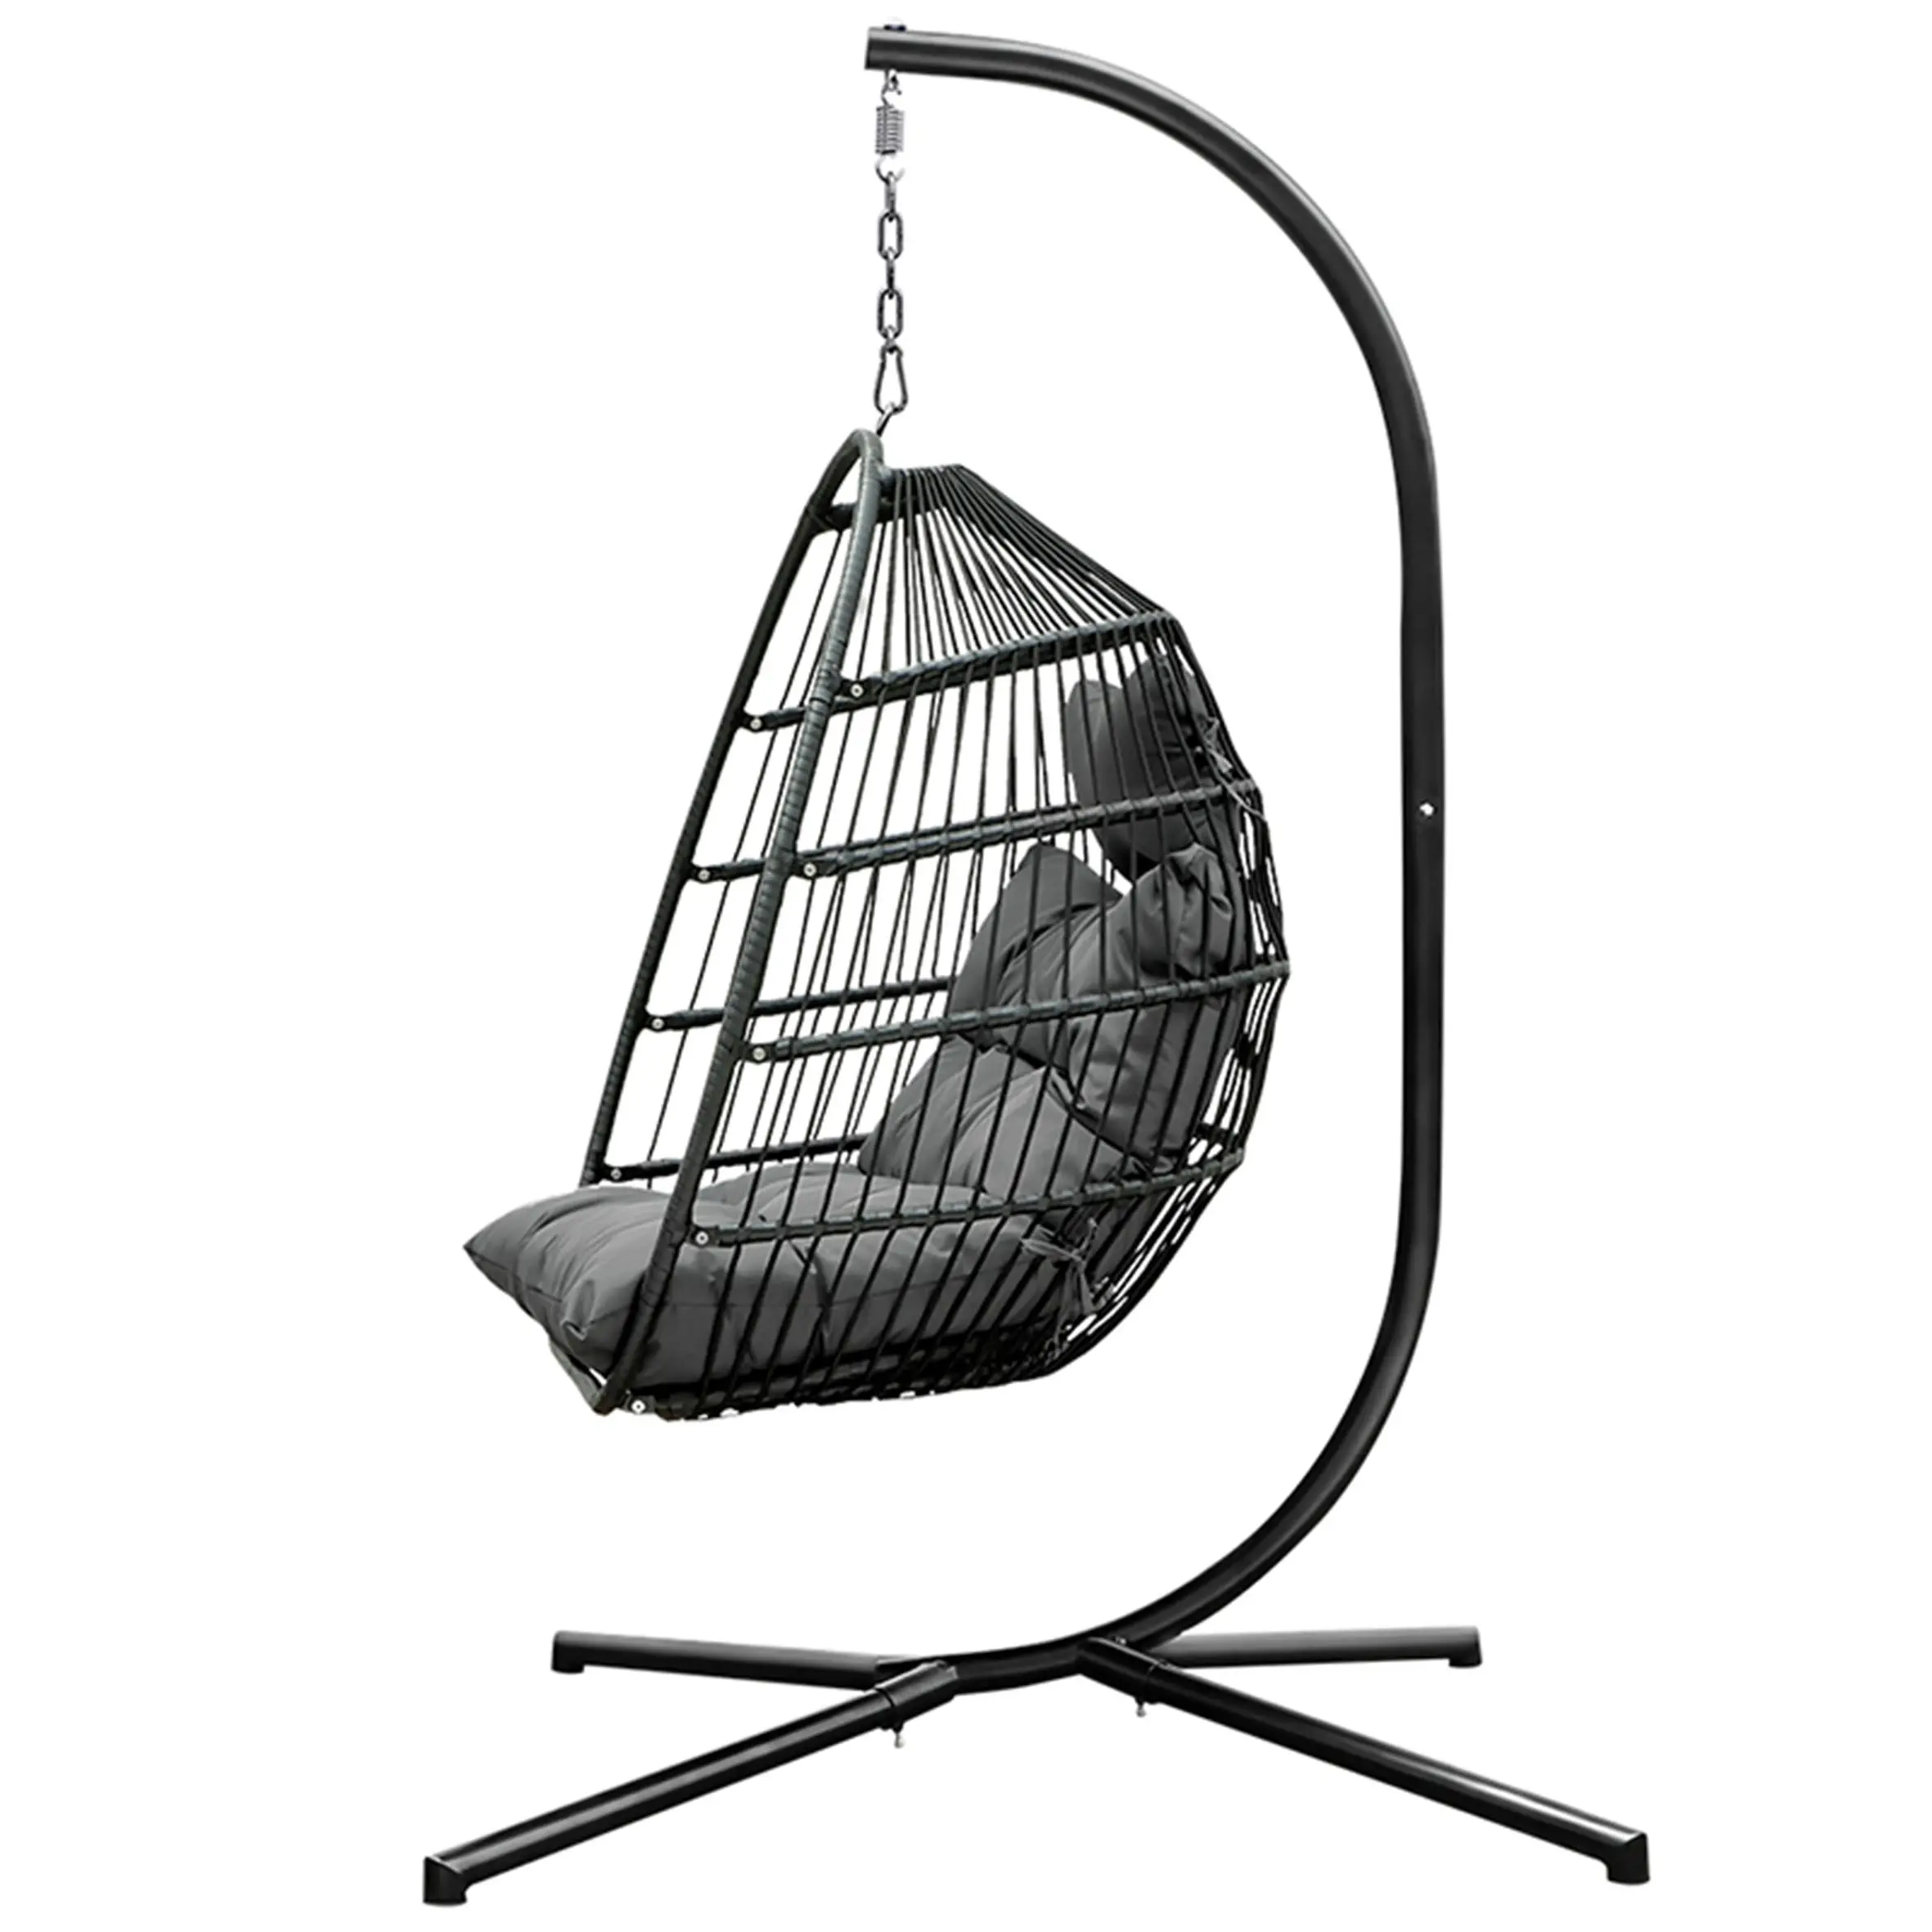 Best Selling Warmly Welcomed European American Style Astonishing,Quality Eye catching Ergonomic Design Patio Egg Swing Chair/